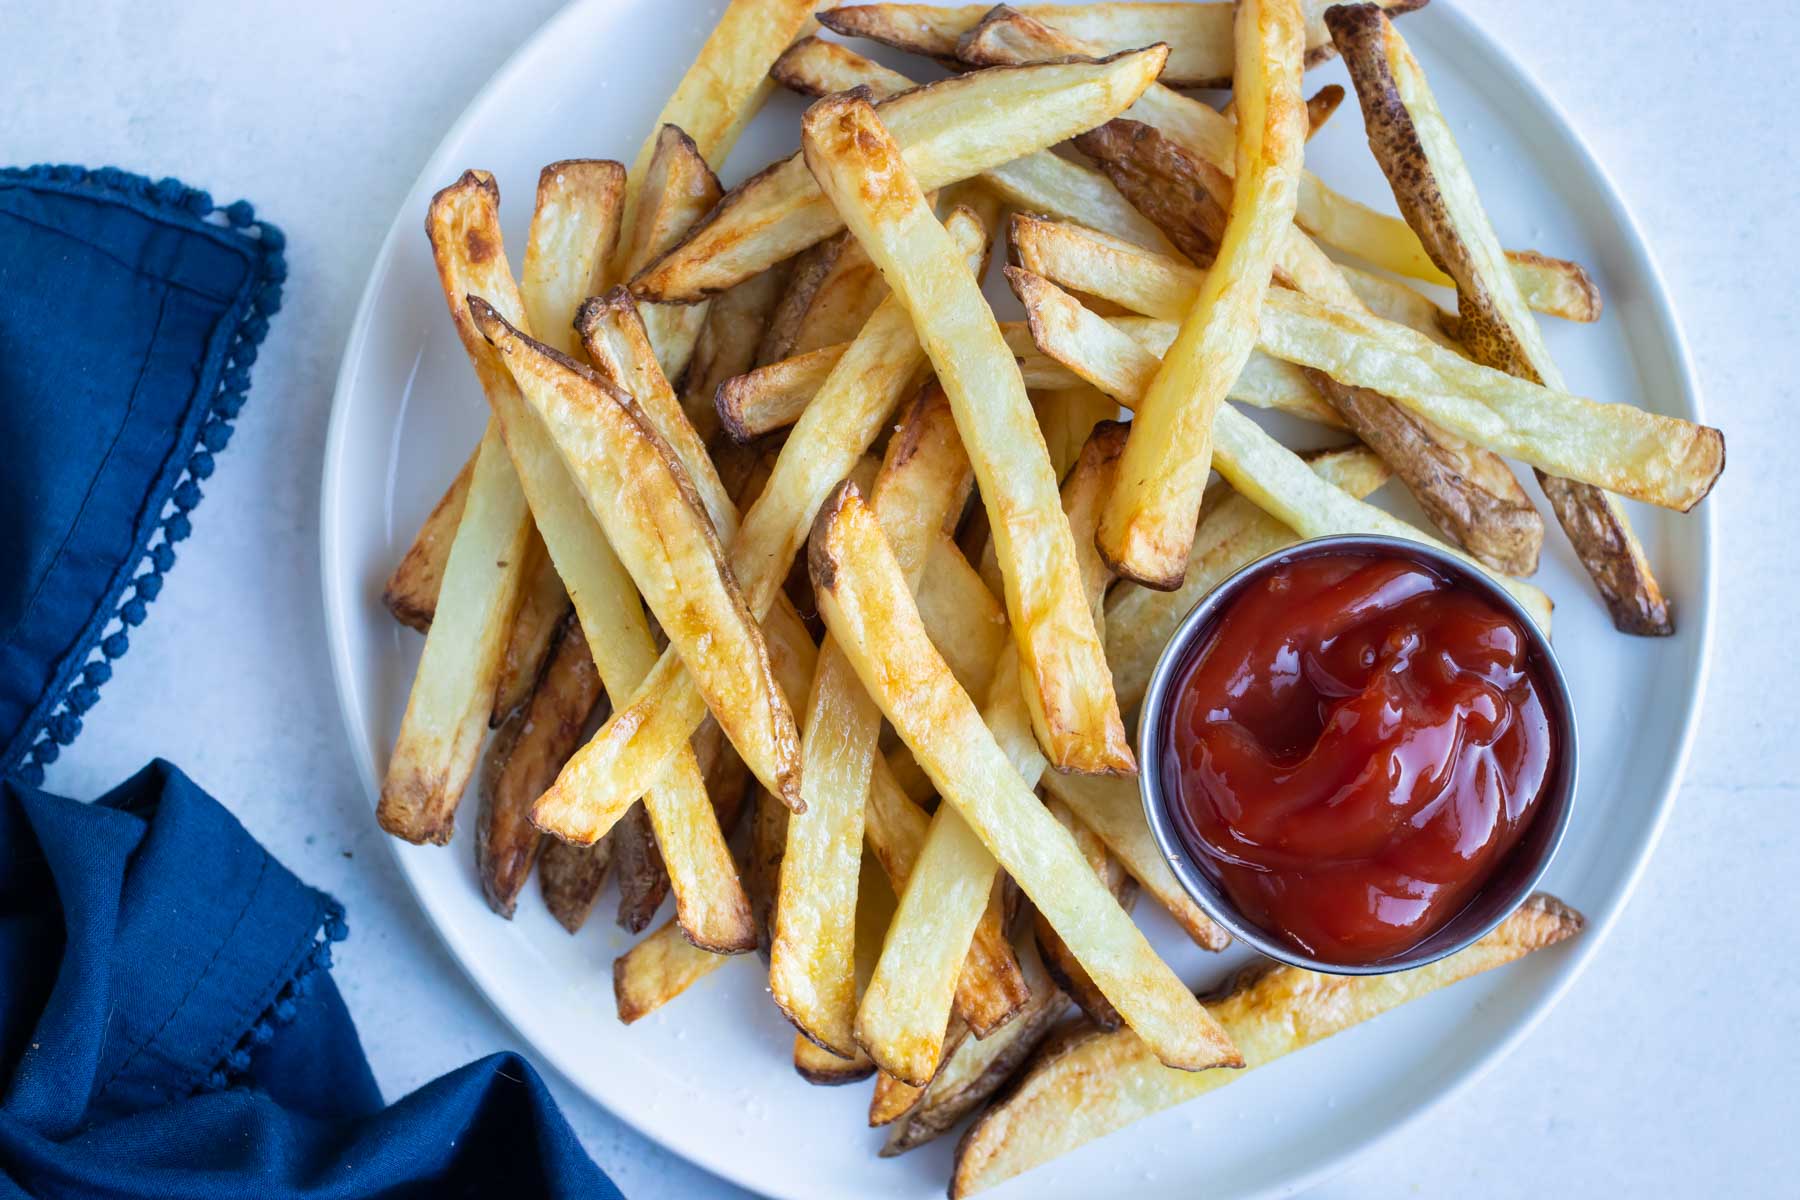 A pile of air fryer french fries are shown on a white plate on the counter.